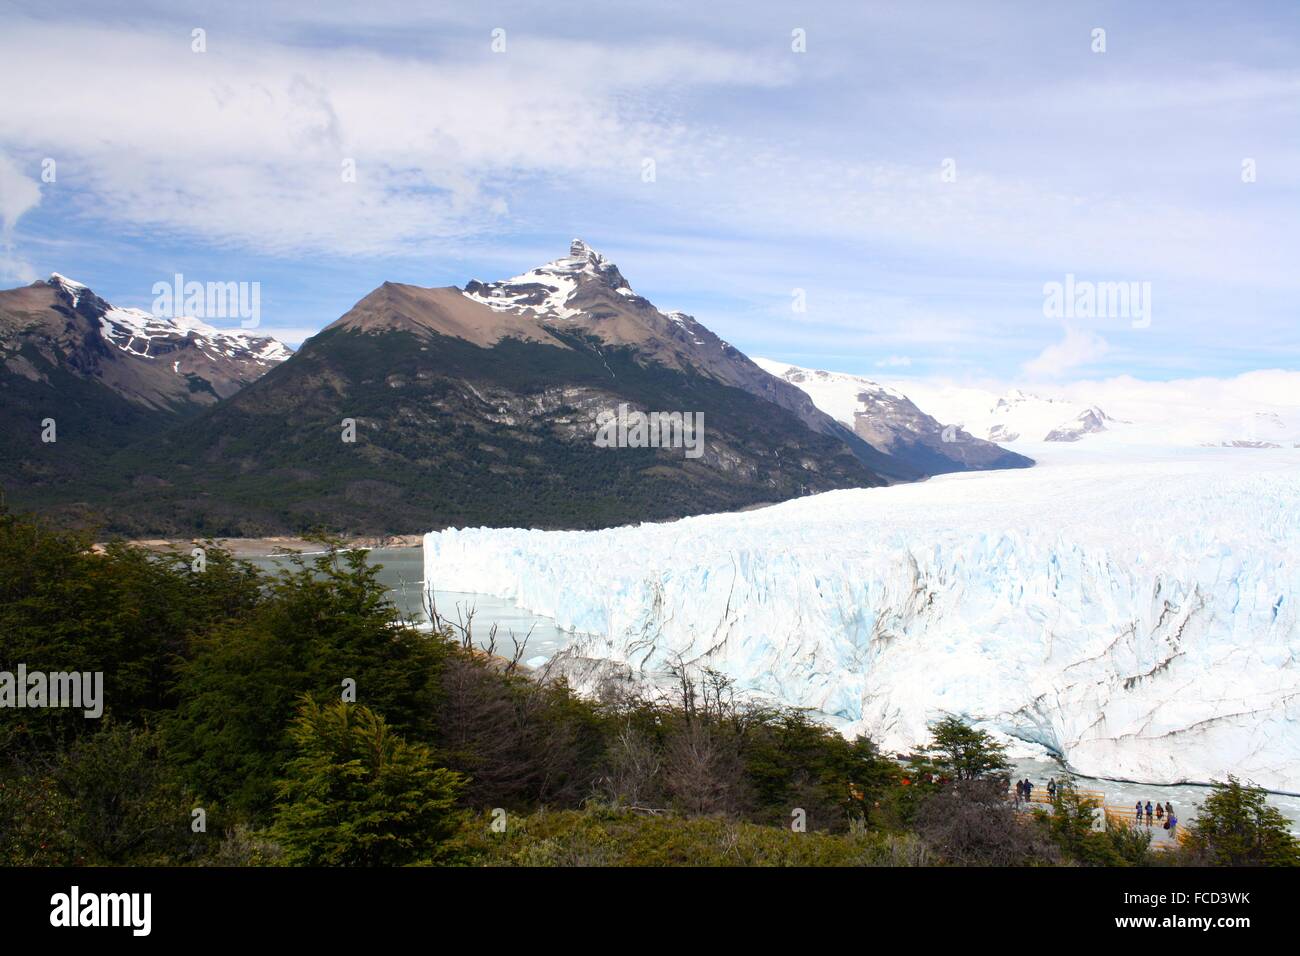 Spectacular Glacial Scenery Seen From Above Coniferous Trees Stock Photo